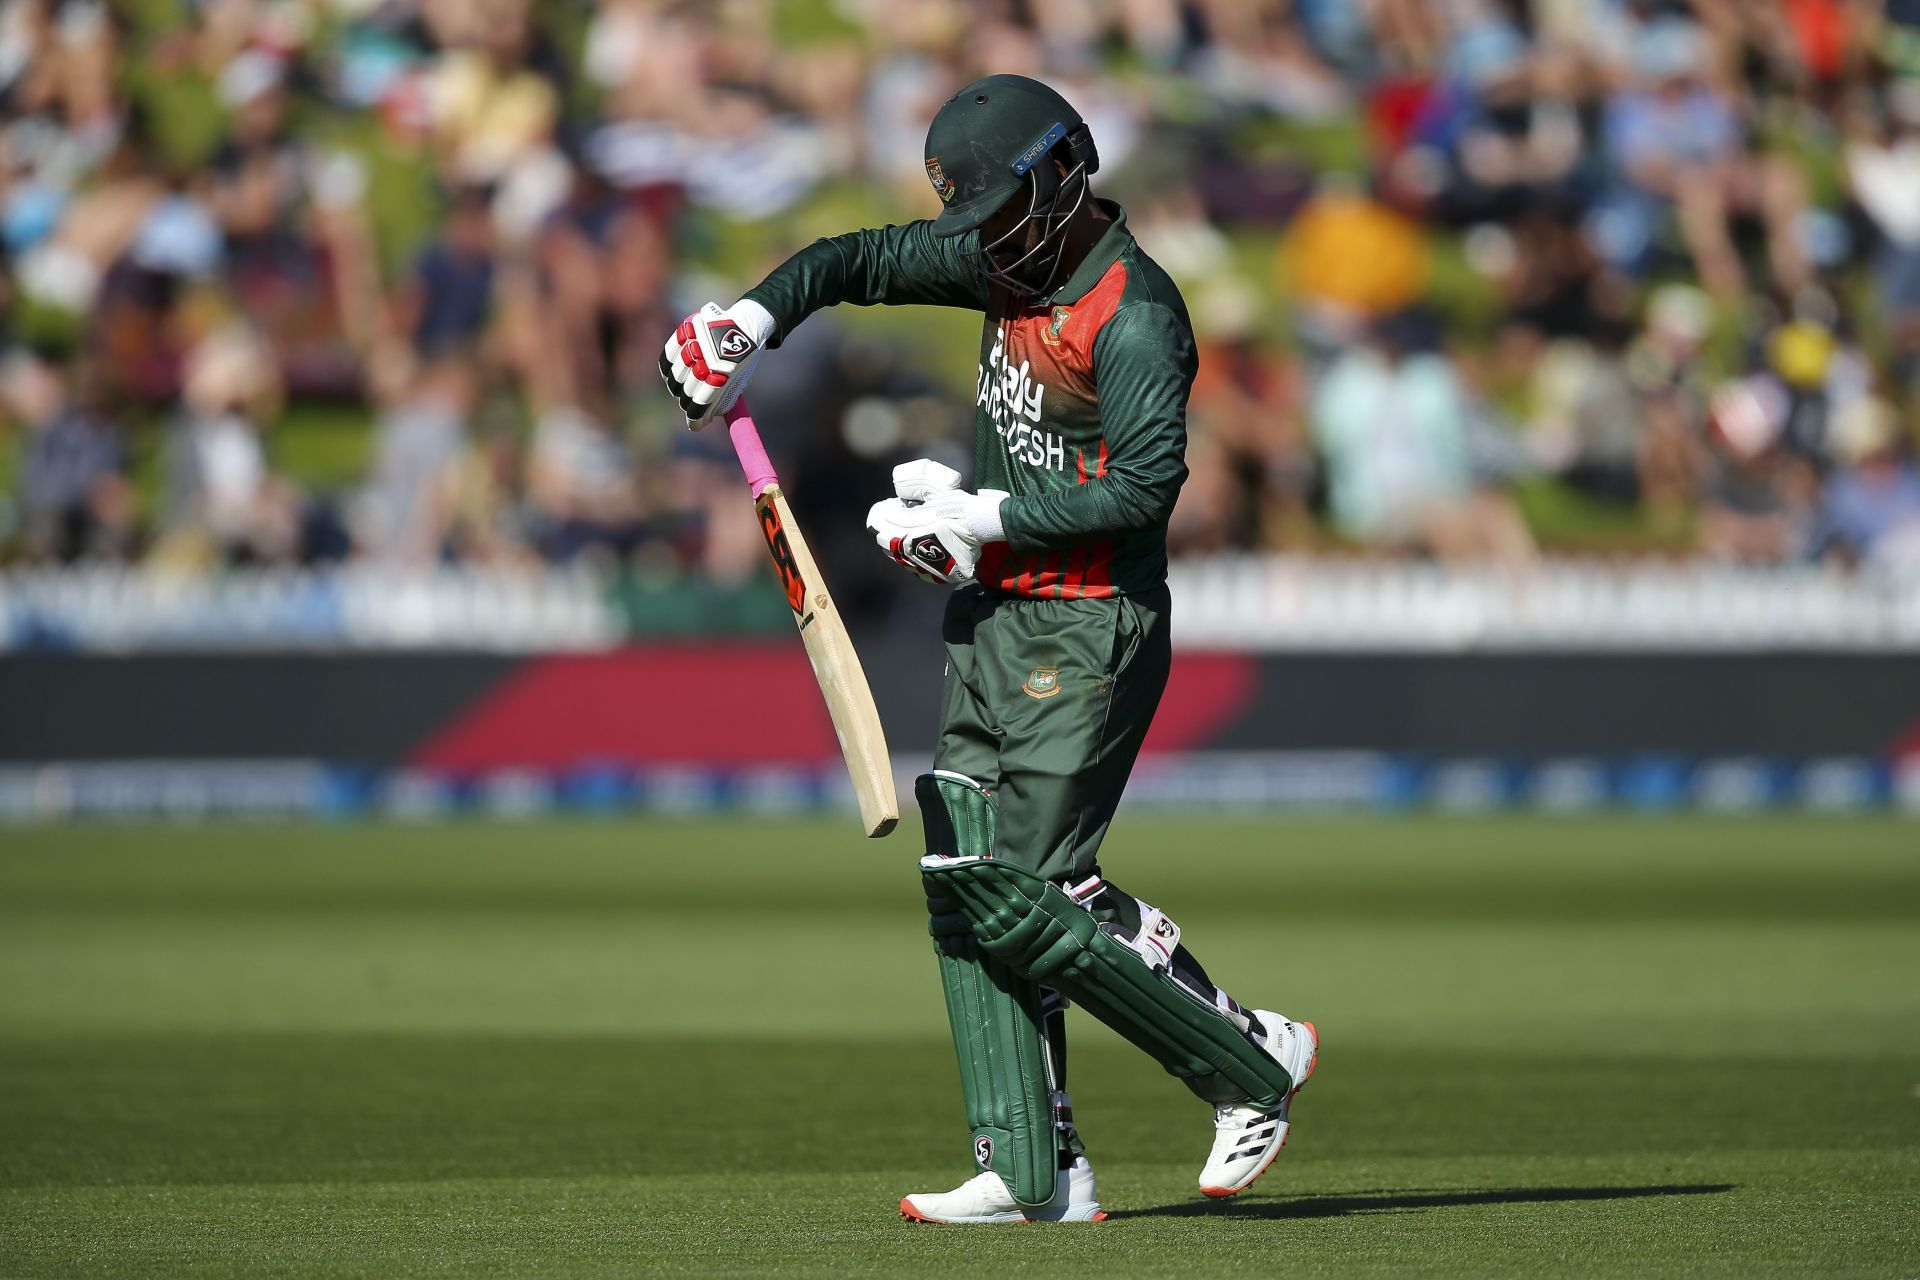 Bangladesh will be looking to do the unthinkable and win the series.